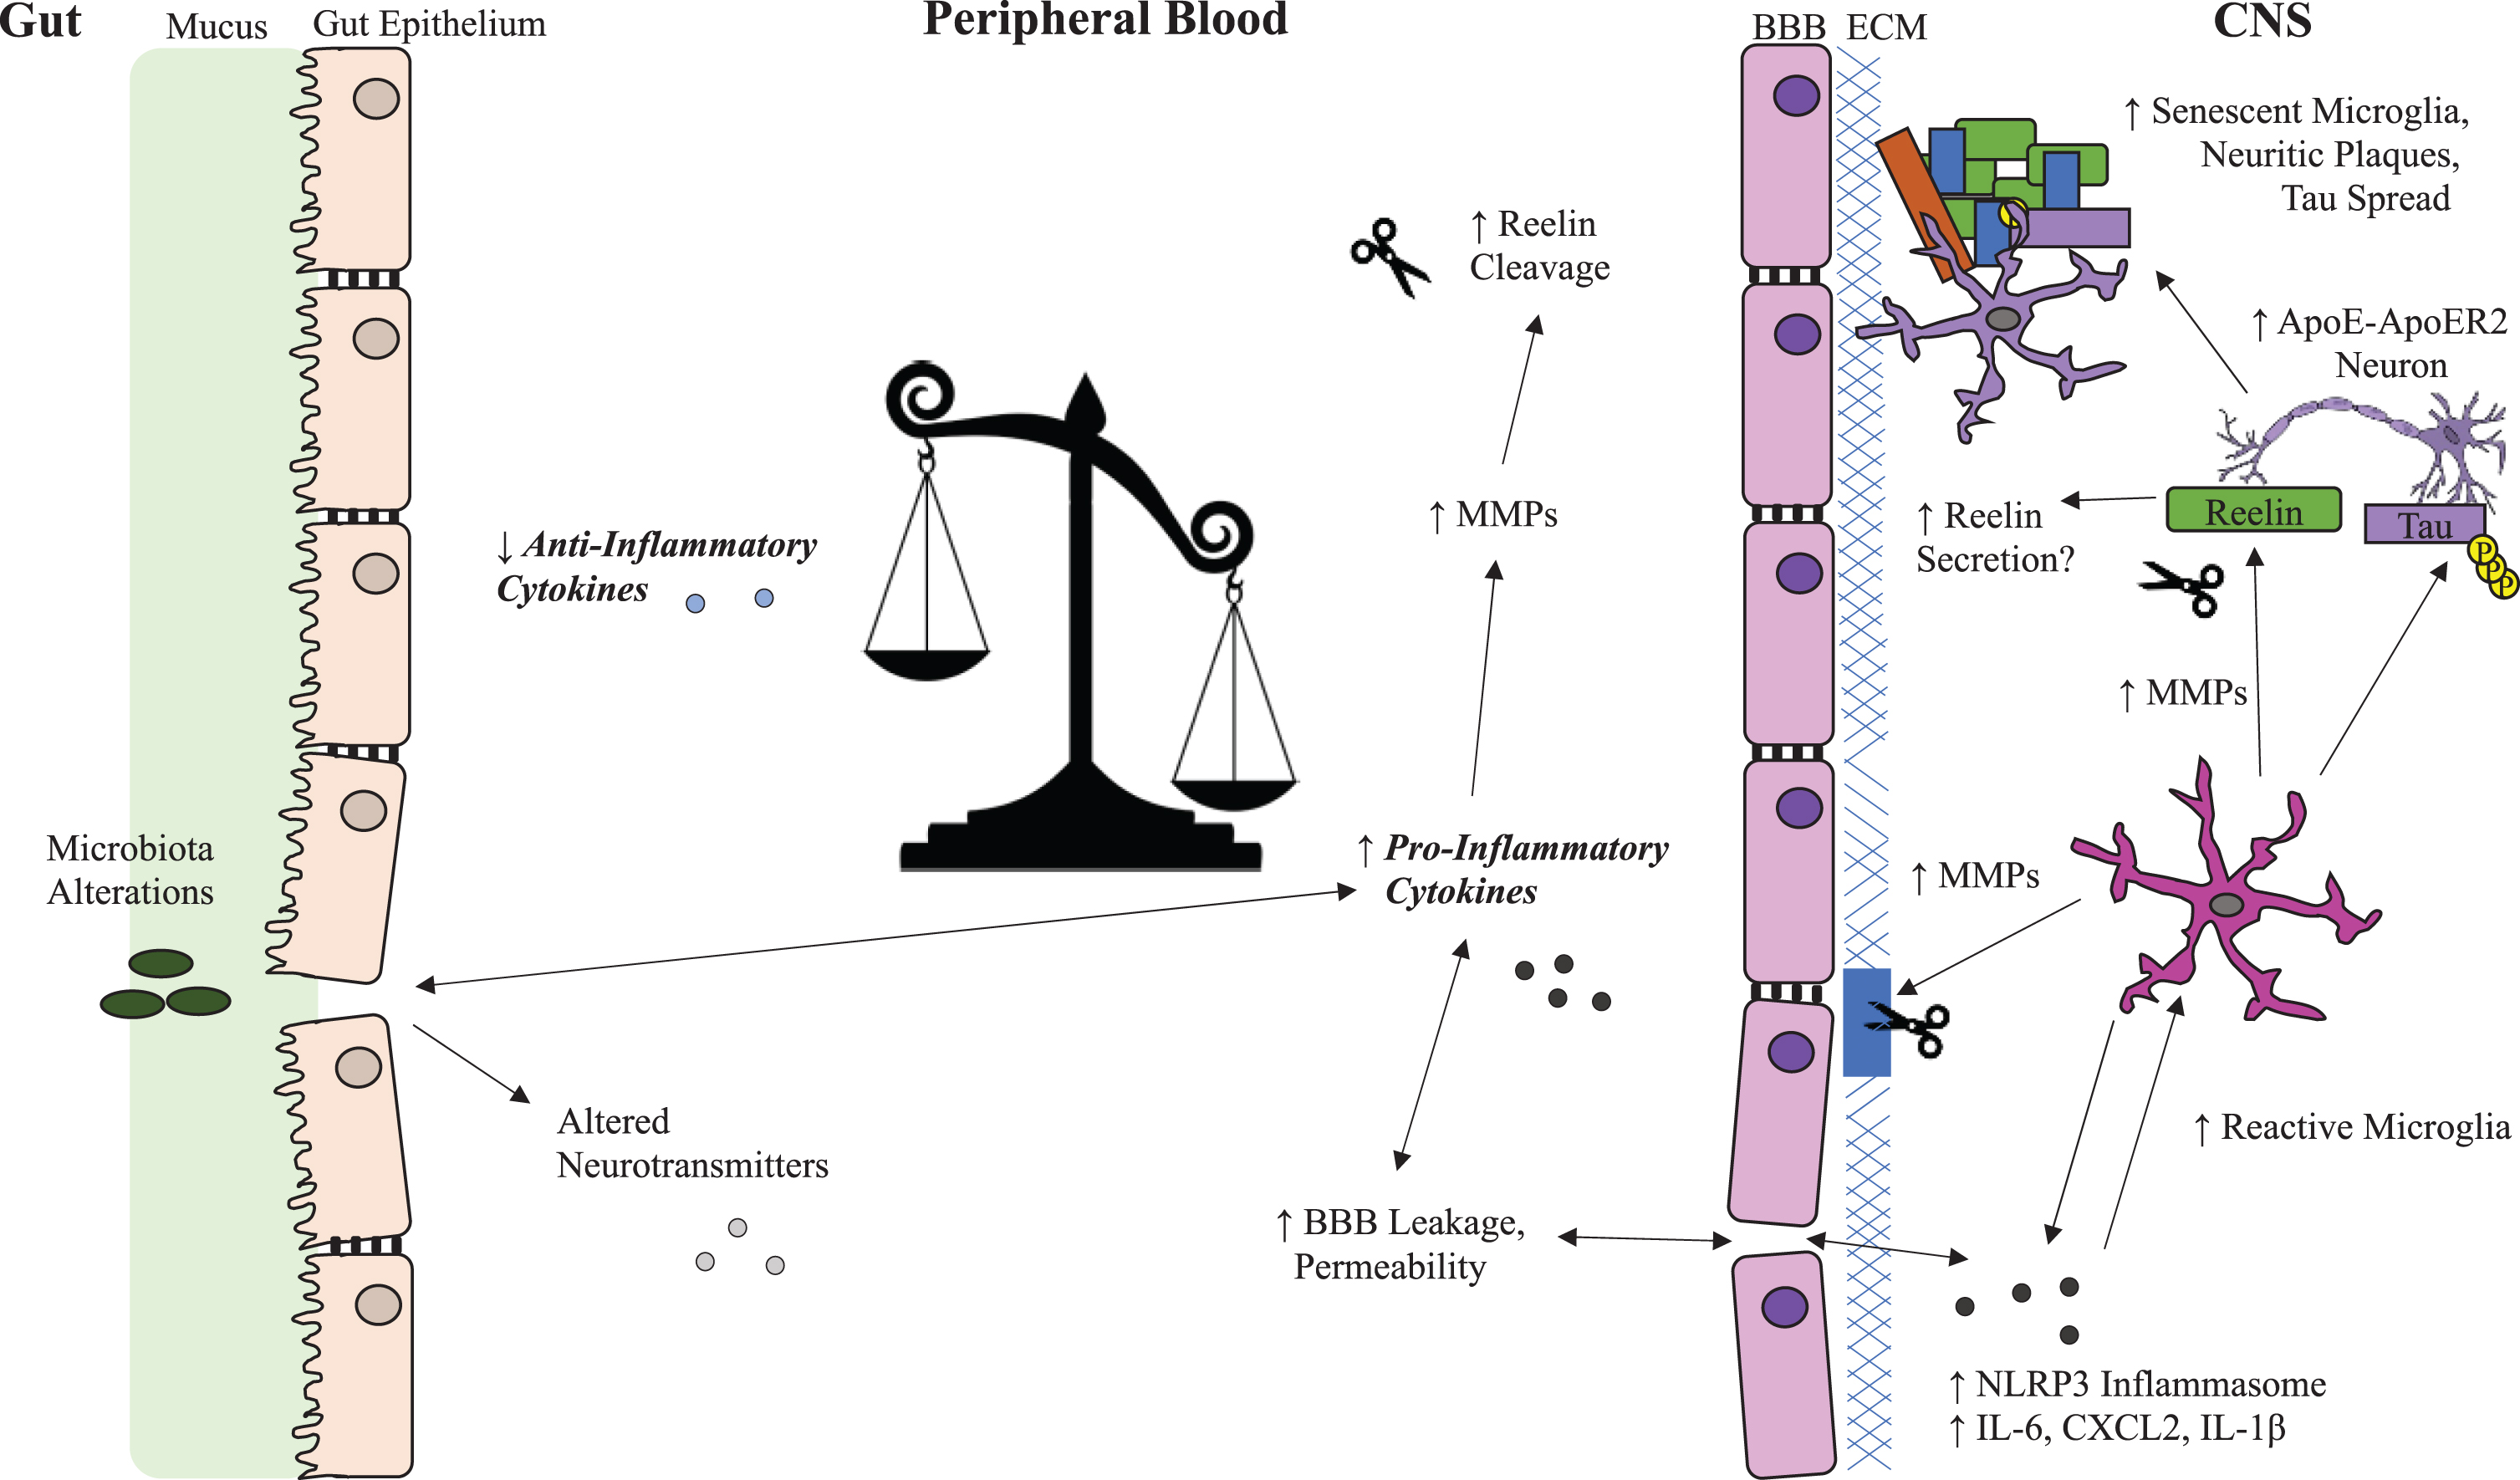 Possible Reelin and Inflammation Systems in Alzheimer’s Disease. Overview of Reelin dysregulation in Alzheimer’s disease (AD) related to the potential impact of peripheral inflammatory cytokines on blood brain barrier integrity, microglial reactivity, and selectively vulnerable neurons in the brain. Inflammation promotes Reelin cleavage in both the periphery and the CNS through upregulation of MMPs, which break down the BBB and increase infiltration of inflammatory cytokines into the CNS. This creates a feedback loop that enhances microglia reactivity and Reelin cleavage and potentially disrupts Reelin secretion from selectively vulnerable neurons leading to aggregation of Reelin fragments in amyloid plaques. ApoE, apolipoprotein E; ApoER2, ApoE receptor 2; BBB, blood-brain barrier; CXCL2, chemokine (C-X-C motif) ligand 2; ECM, extracellular matrix; IL-1β, interleukin 1-beta; IL-6, interleukin 6; MMP, matrix metalloproteases; NLRP3, NLR family pyrin domain containing 3; p-tau, phosphorylated tau; VLDLR, very low-density lipoprotein receptor.